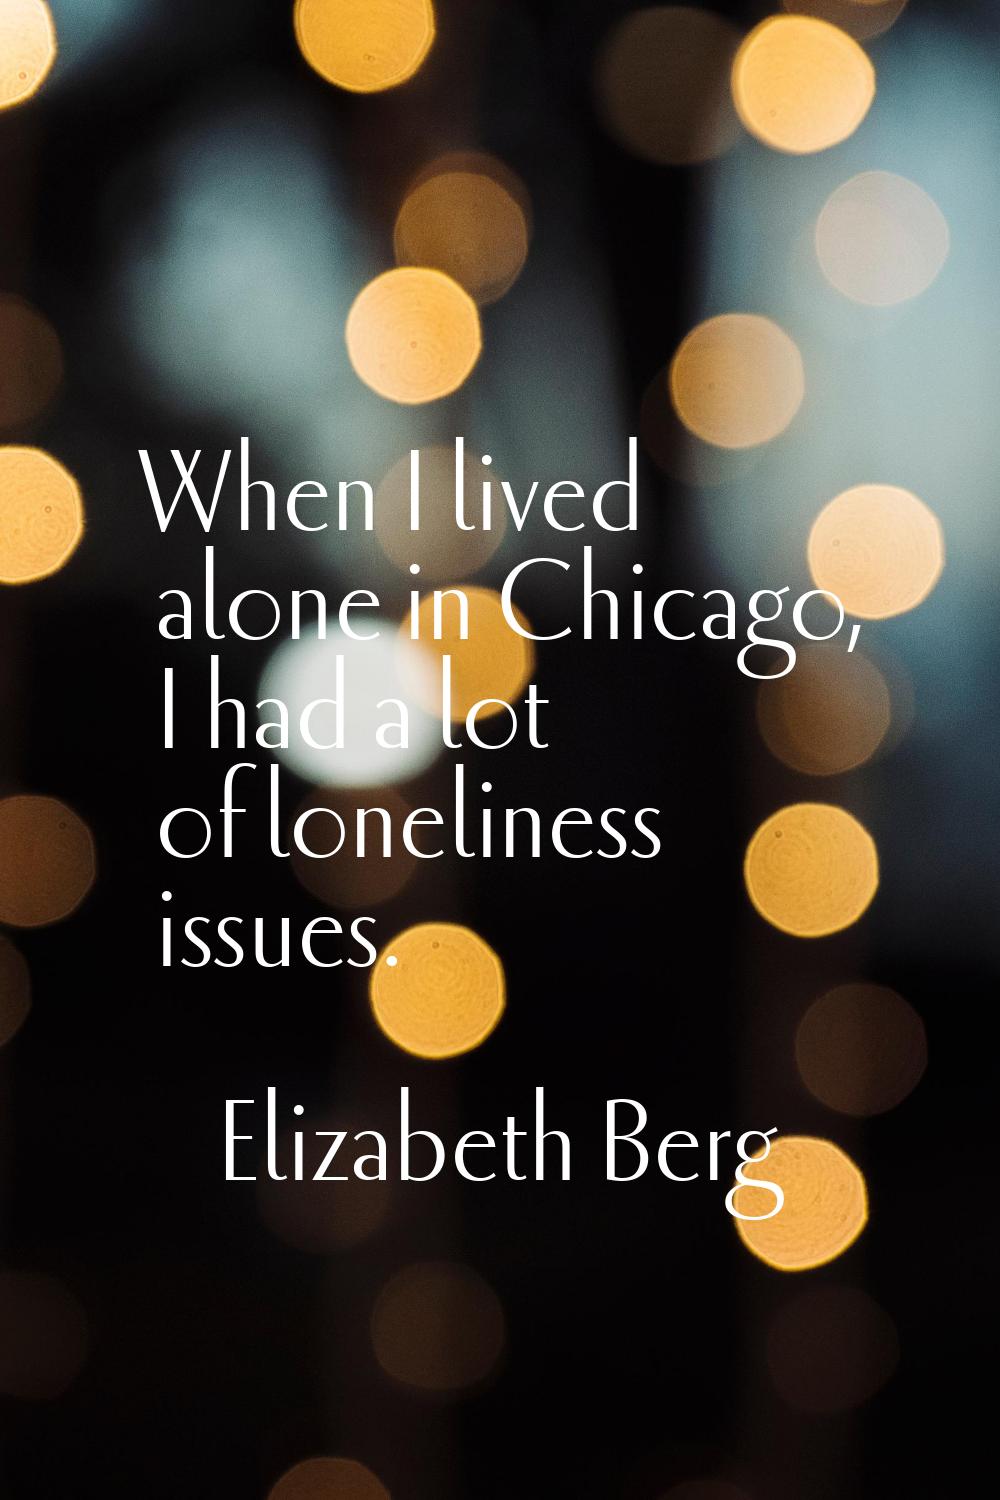 When I lived alone in Chicago, I had a lot of loneliness issues.